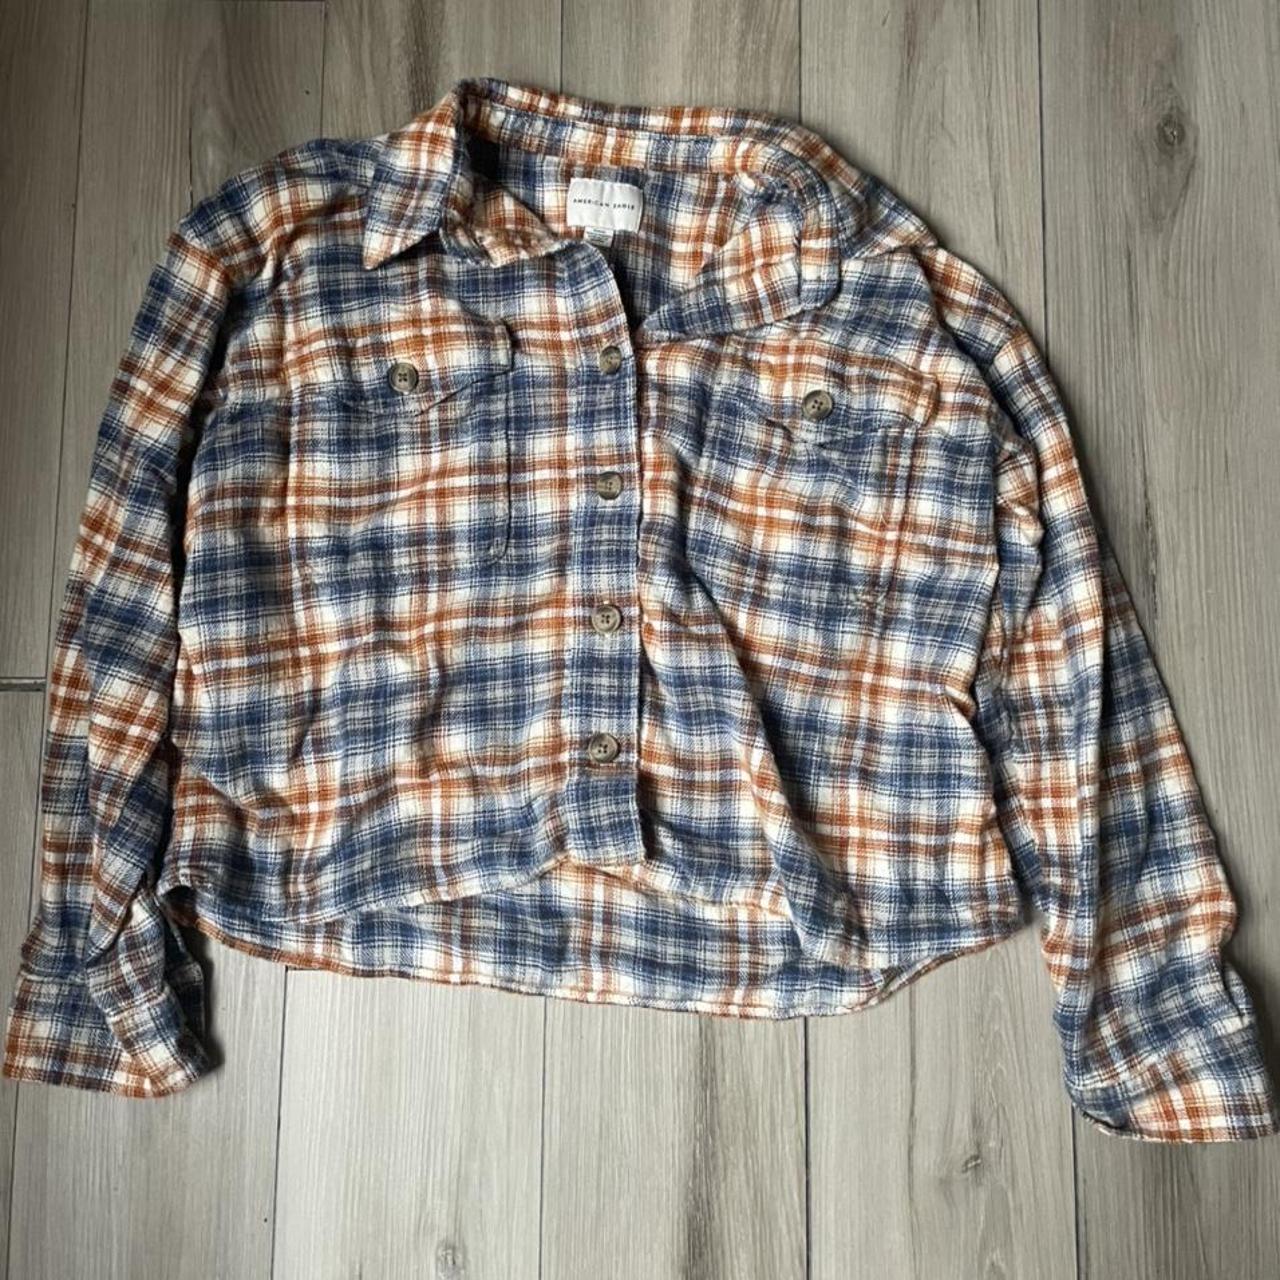 American Eagle Outfitters Women's Blue and Orange Shirt